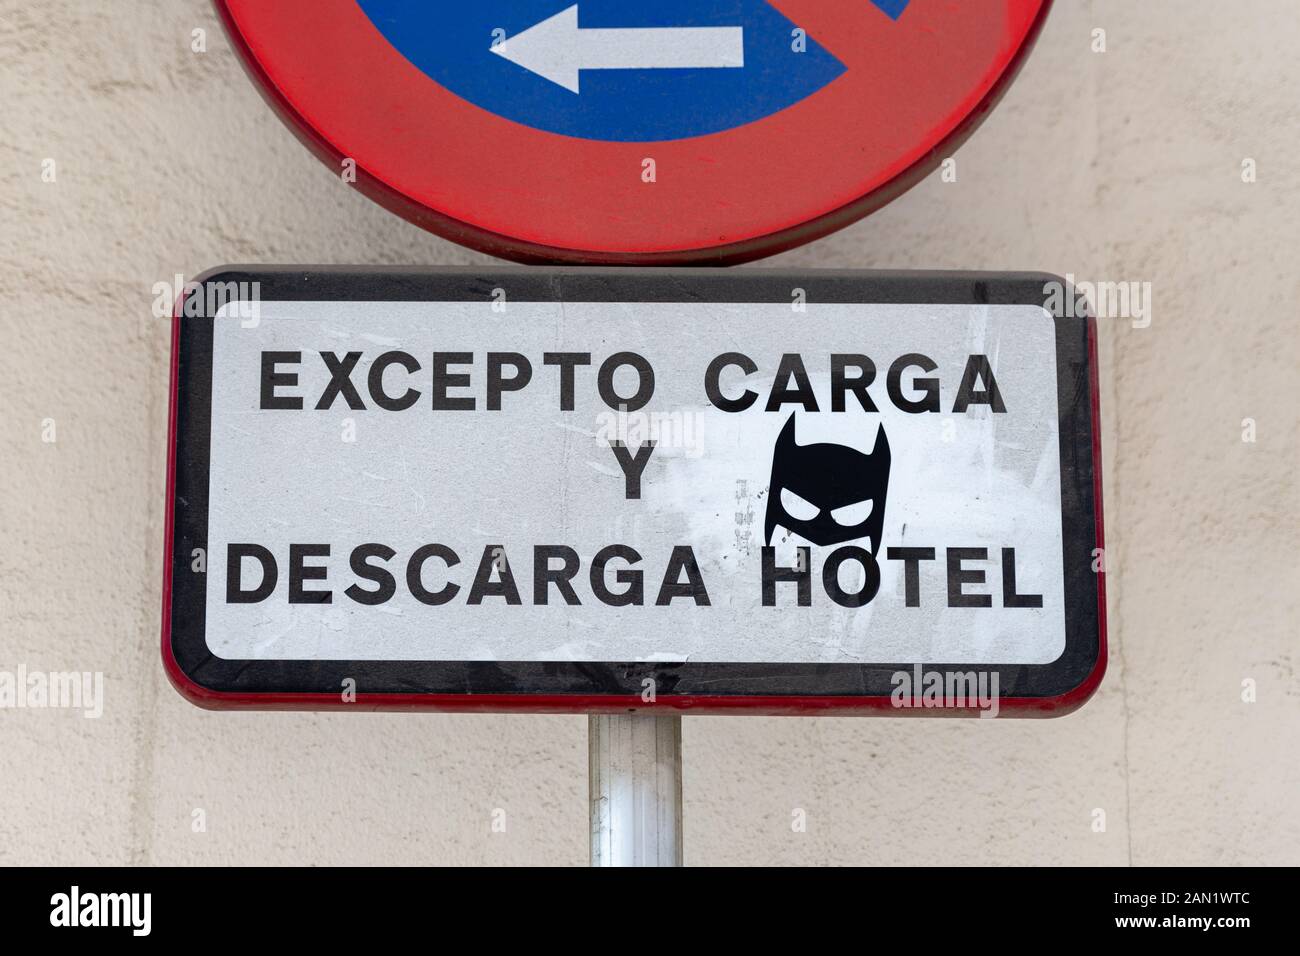 A batman mask has been added to a street sign in Seville. Stock Photo